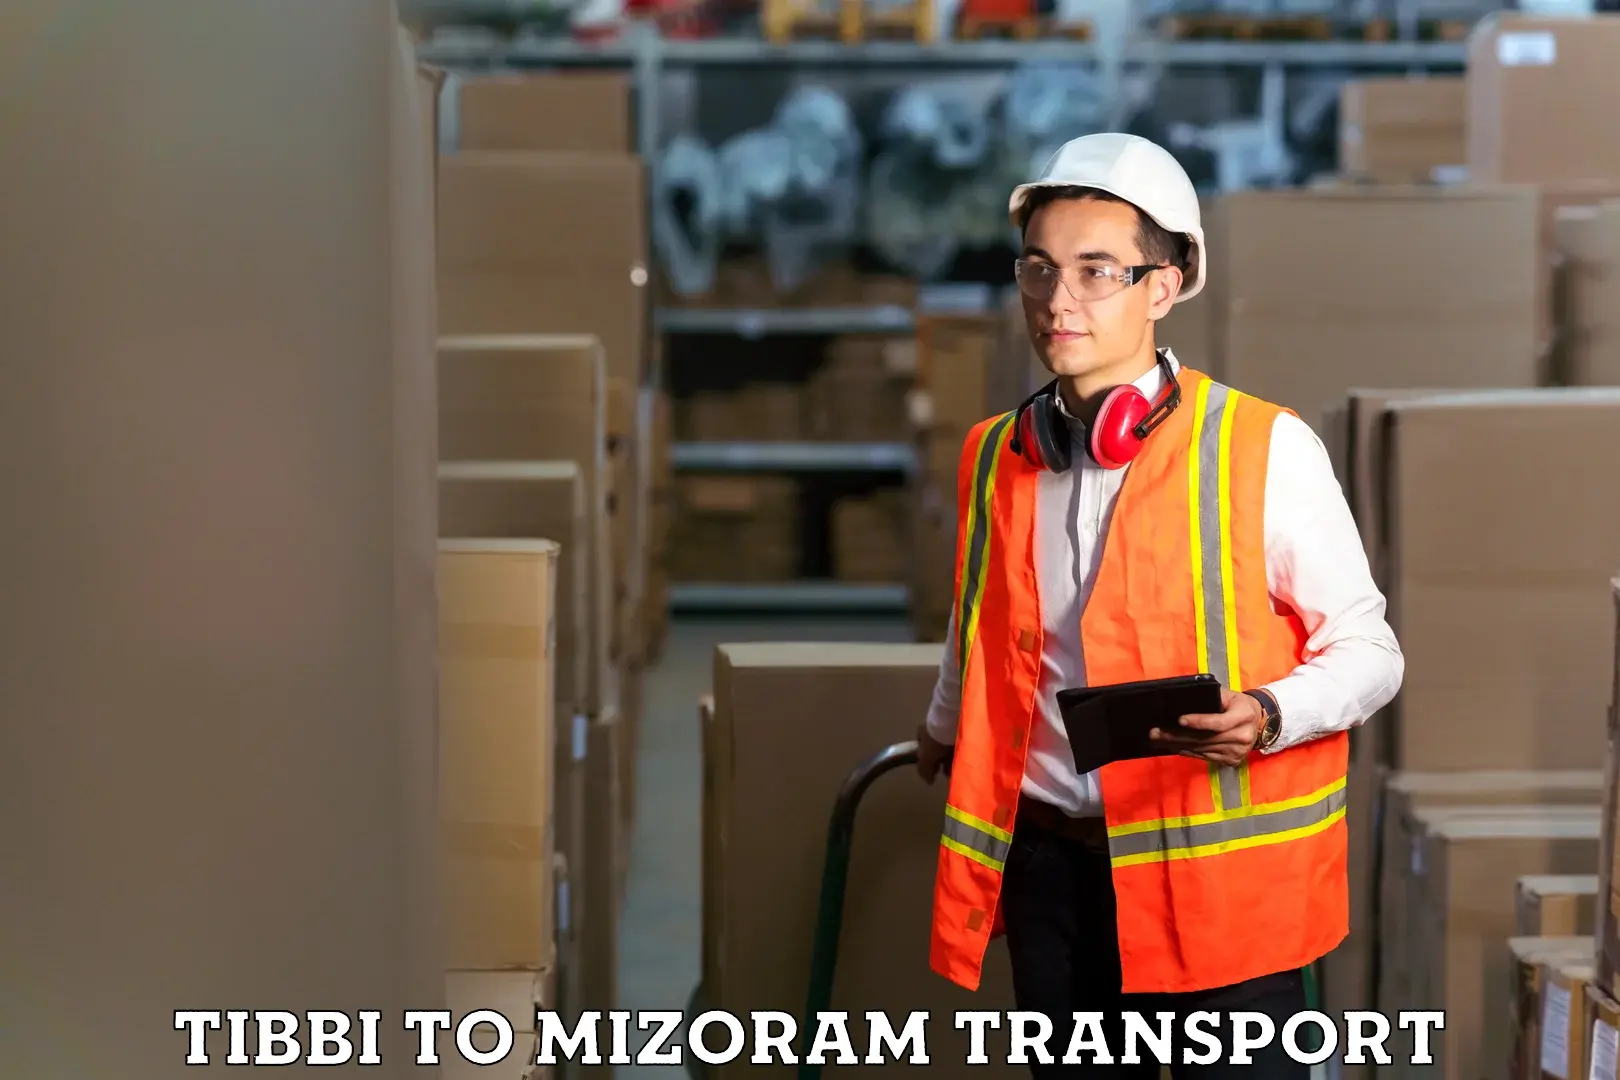 Transport bike from one state to another Tibbi to Mizoram